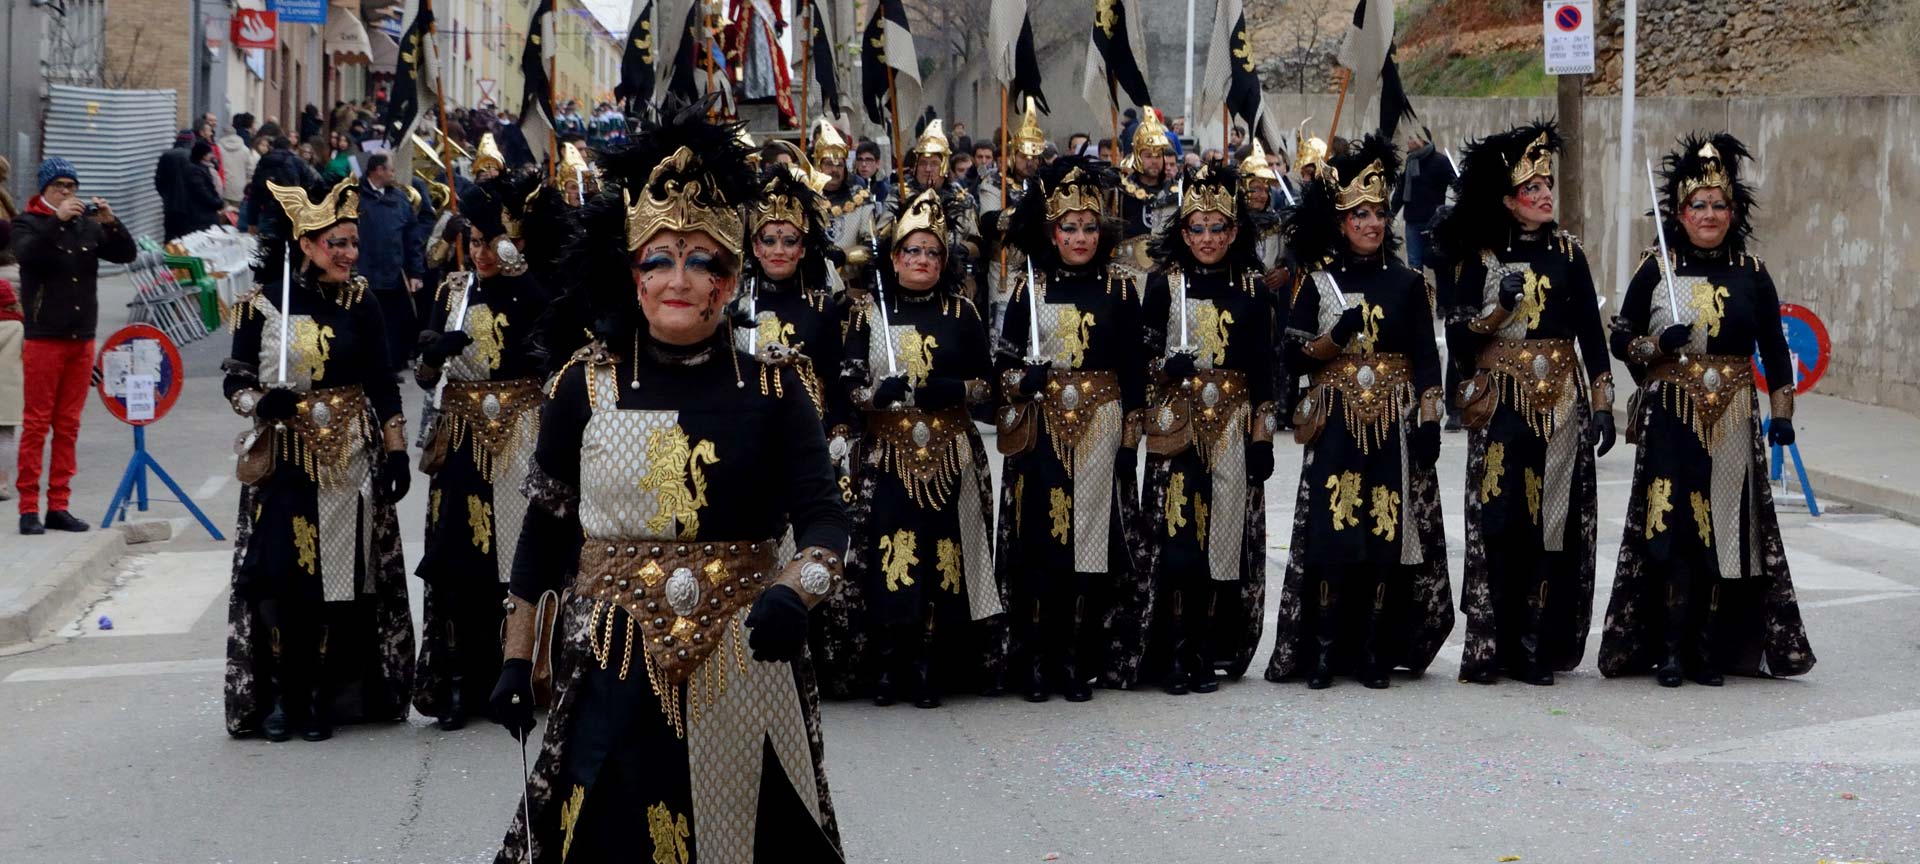 Festival of Moors and Christians in Bocairent (Valencia - Region of Valencia)